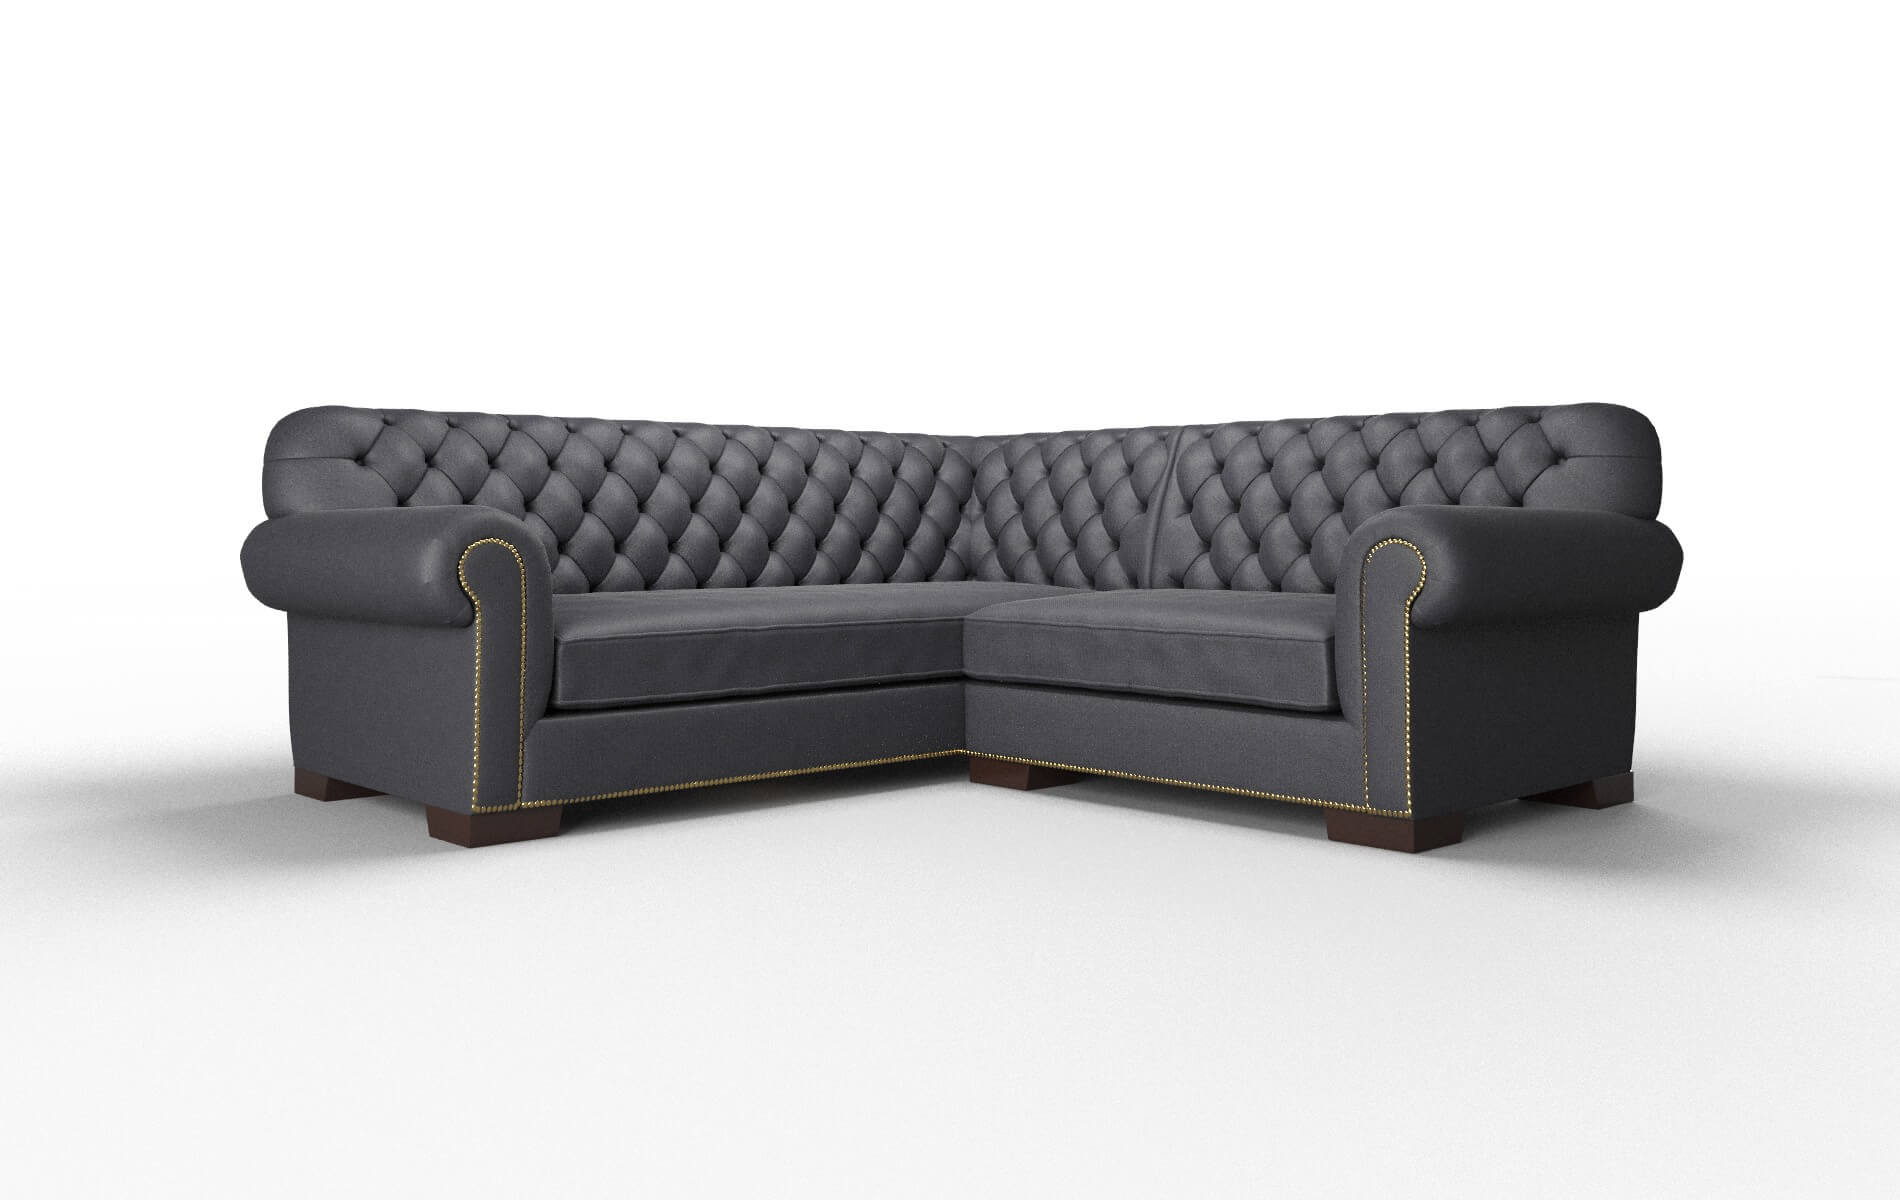 Chester Urban_d Eclipse Sectional espresso legs 1